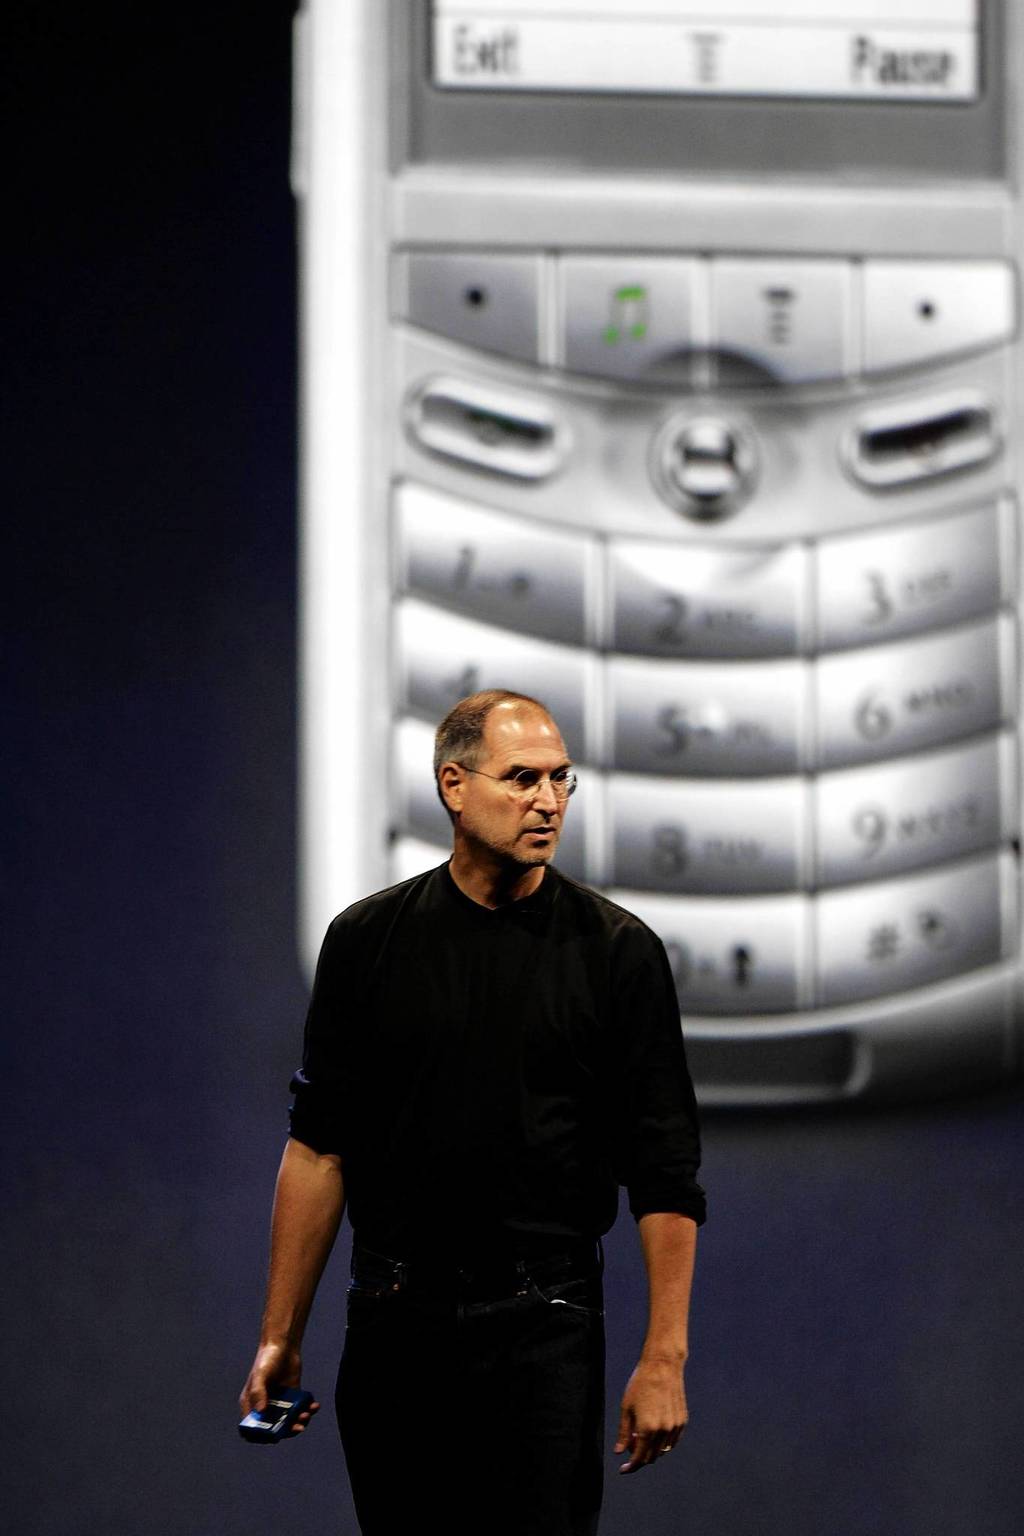 Apple CEO Steve Jobs introduces the new iPod cell phone, made by Motorola at the Moscone Center in San Francisco. This was the first cellphone that had iTunes on it.